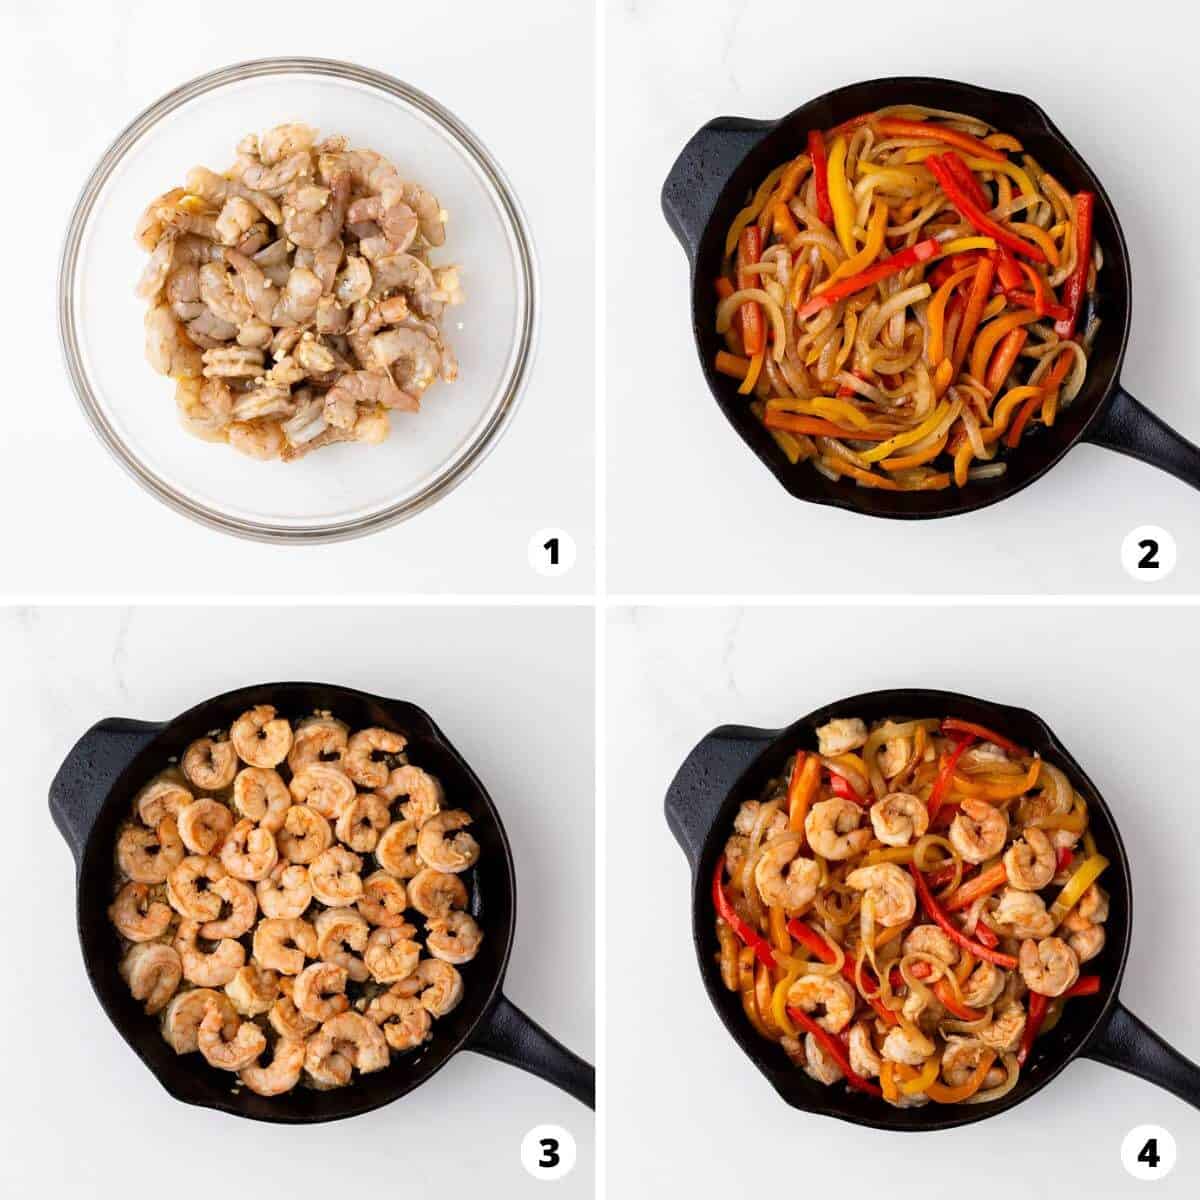 Showing how to make shrimp fajitas in a 4 step collage.